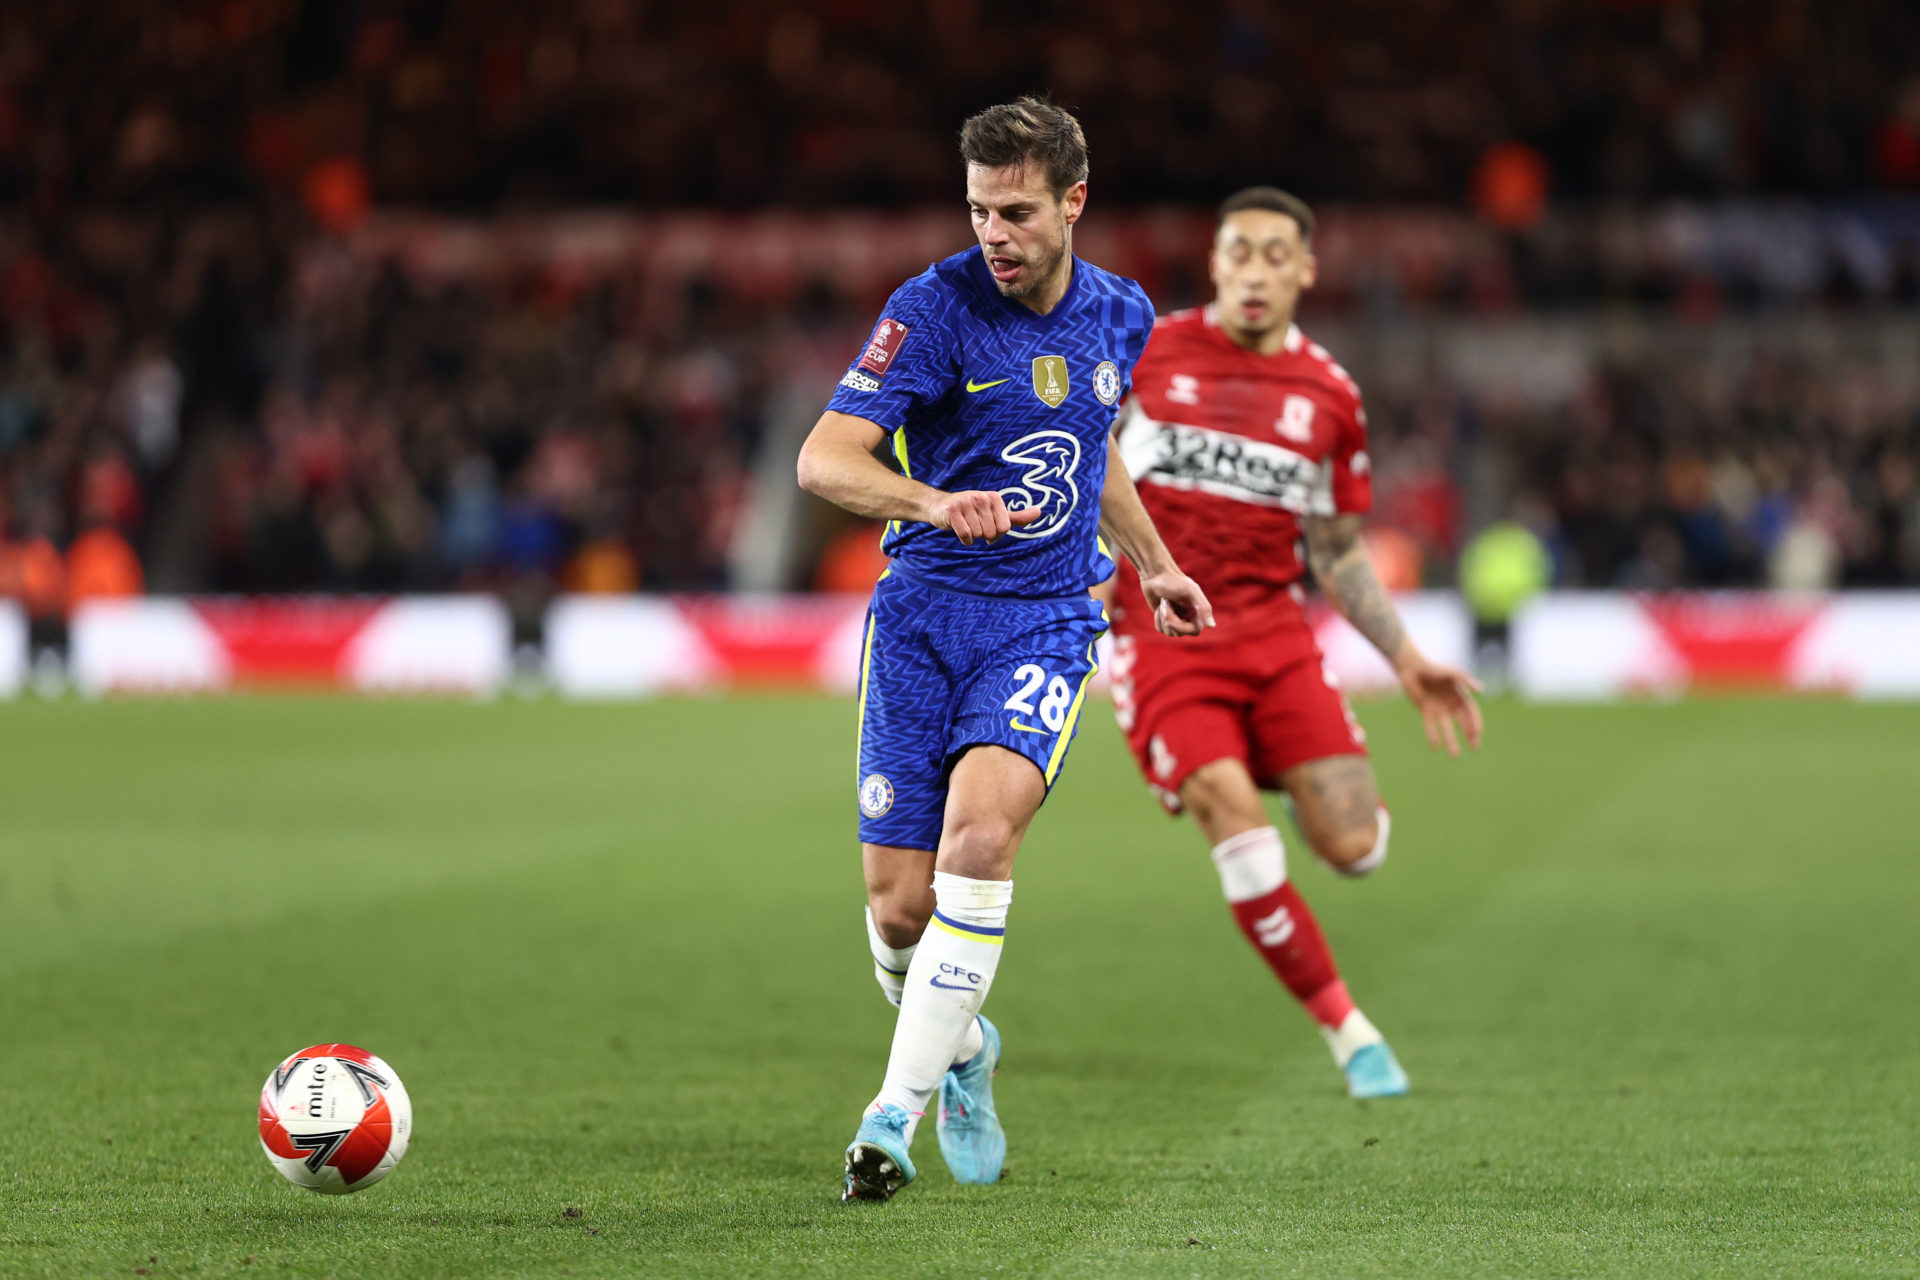 Middlesbrough v Chelsea: The Emirates FA Cup Quarter Final